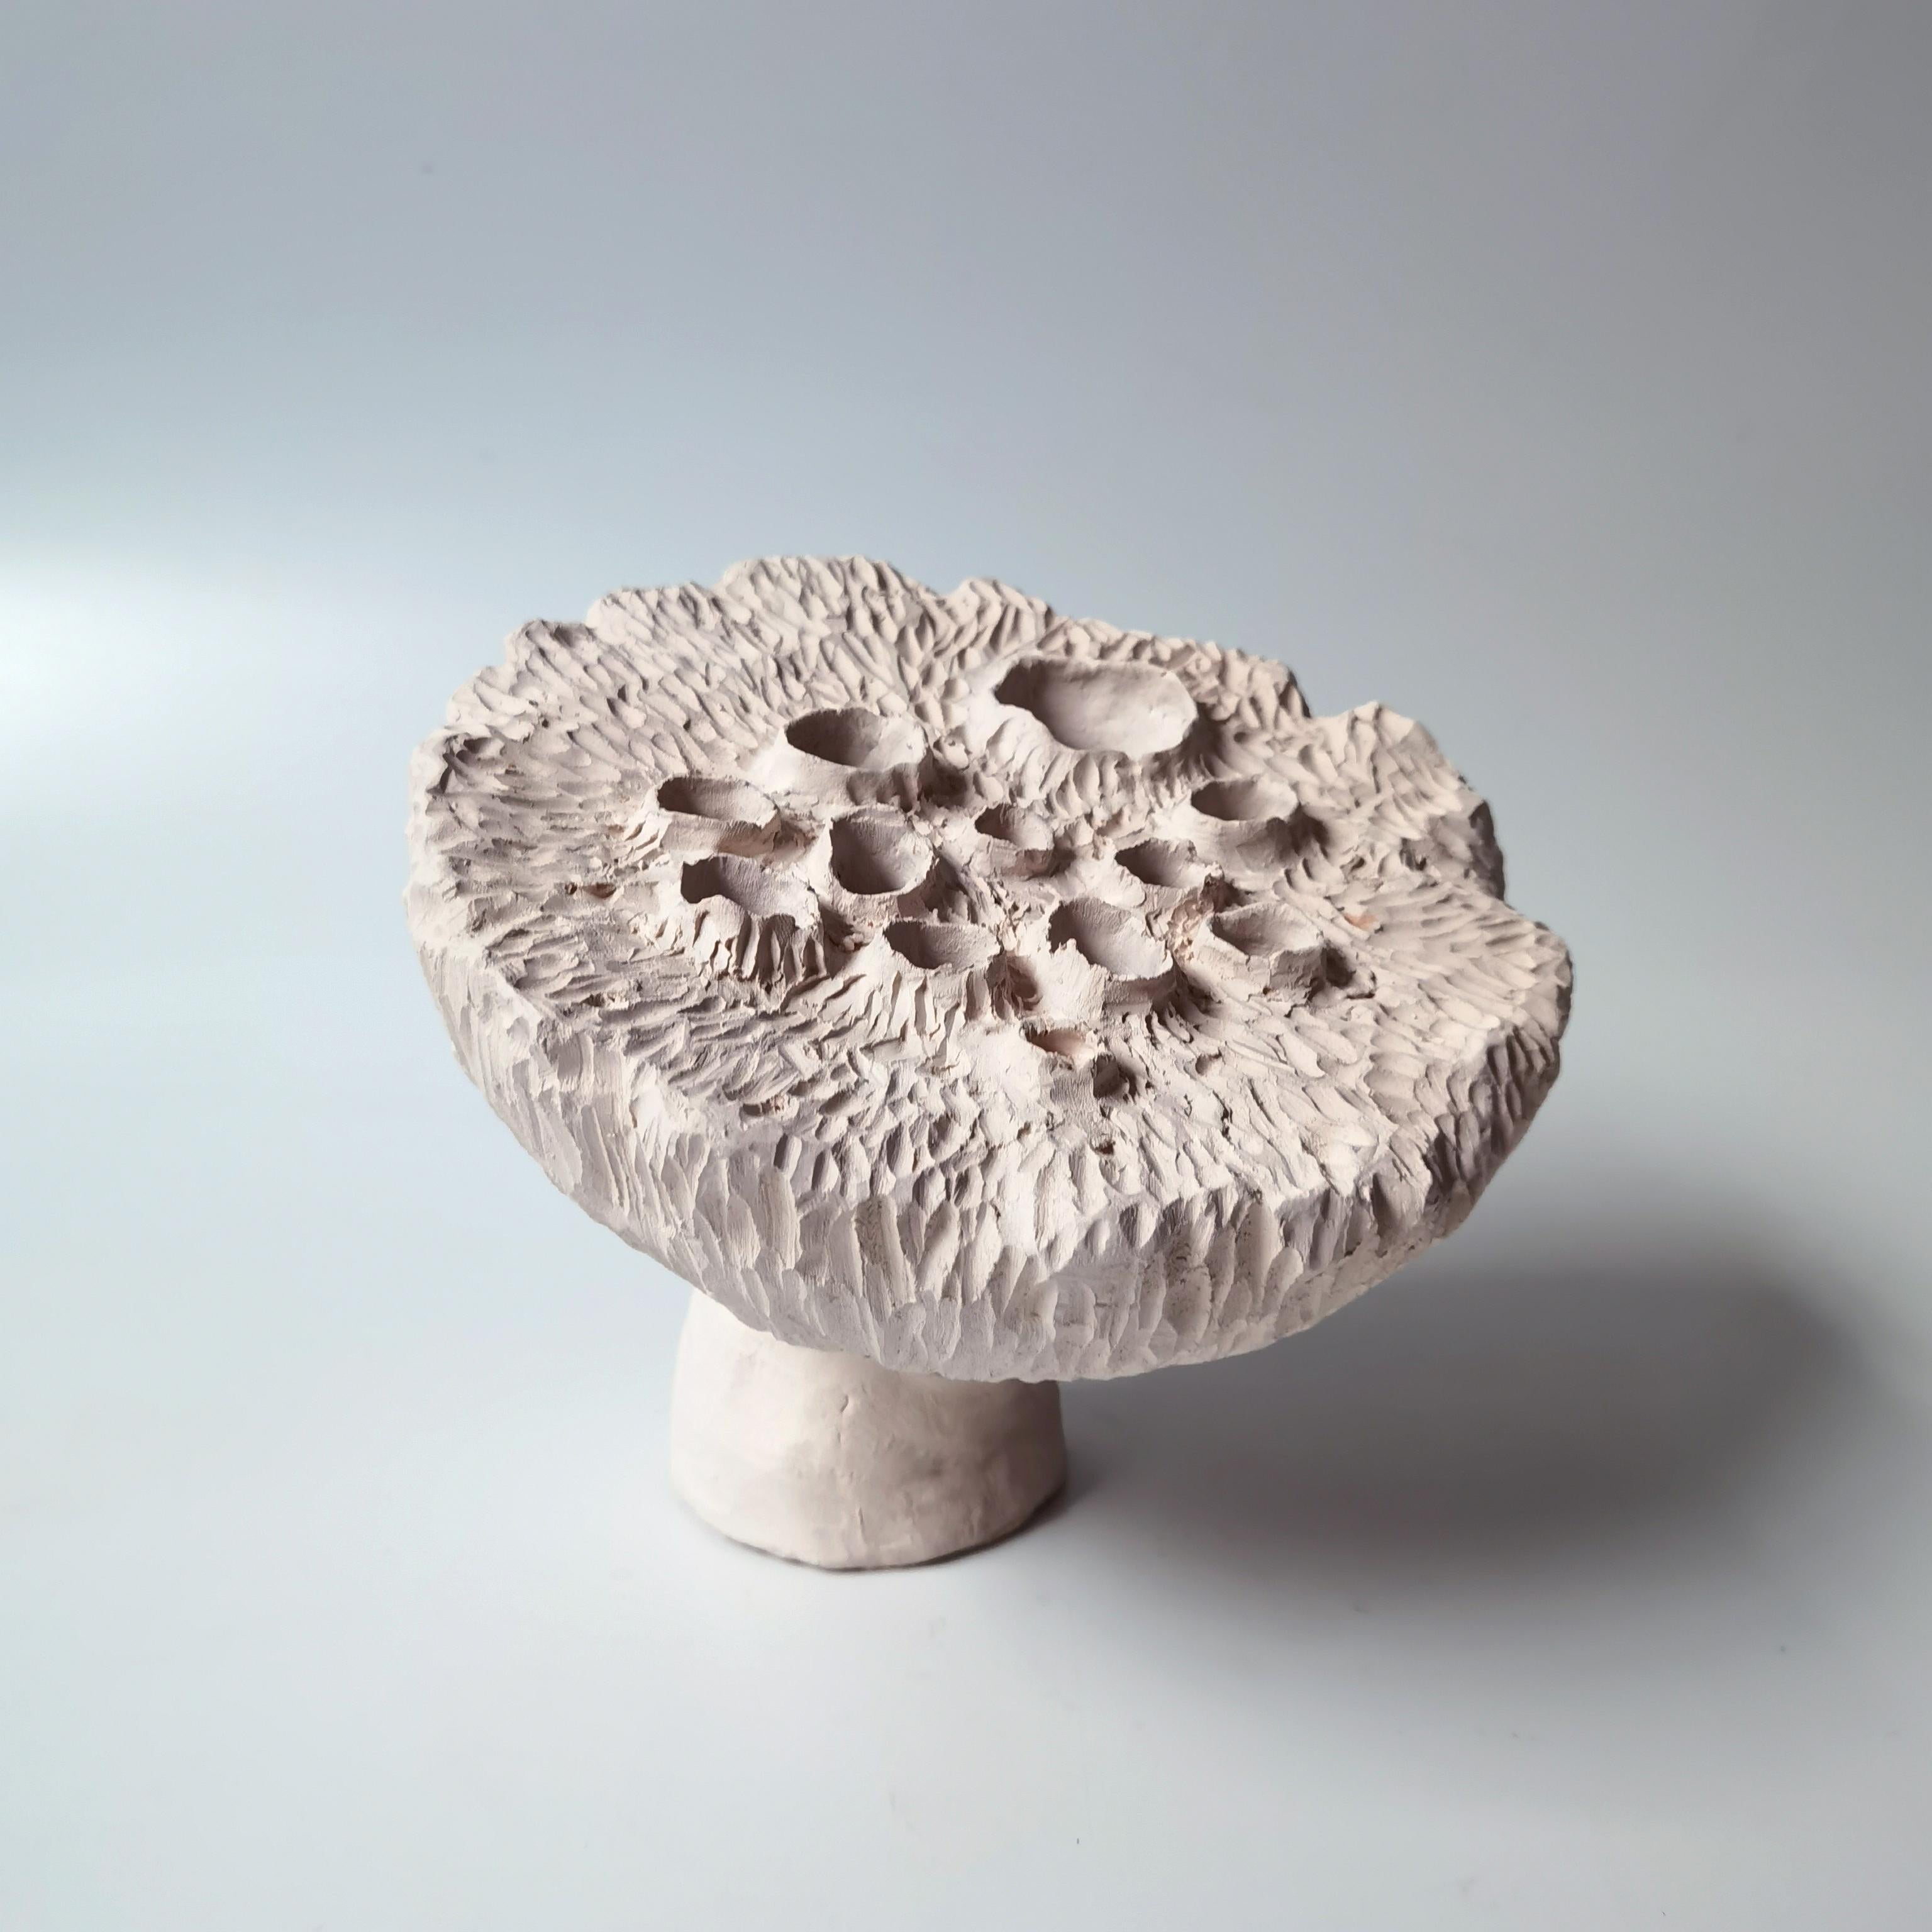 Stoneware lotus pod by Jan Ernst
Dimensions: H 20 cm
Materials: White stoneware

Jan Ernst’s work takes on an experimental approach, as he prefers making bespoke pieces by hand. His organic design stems from his
abstract understanding of form